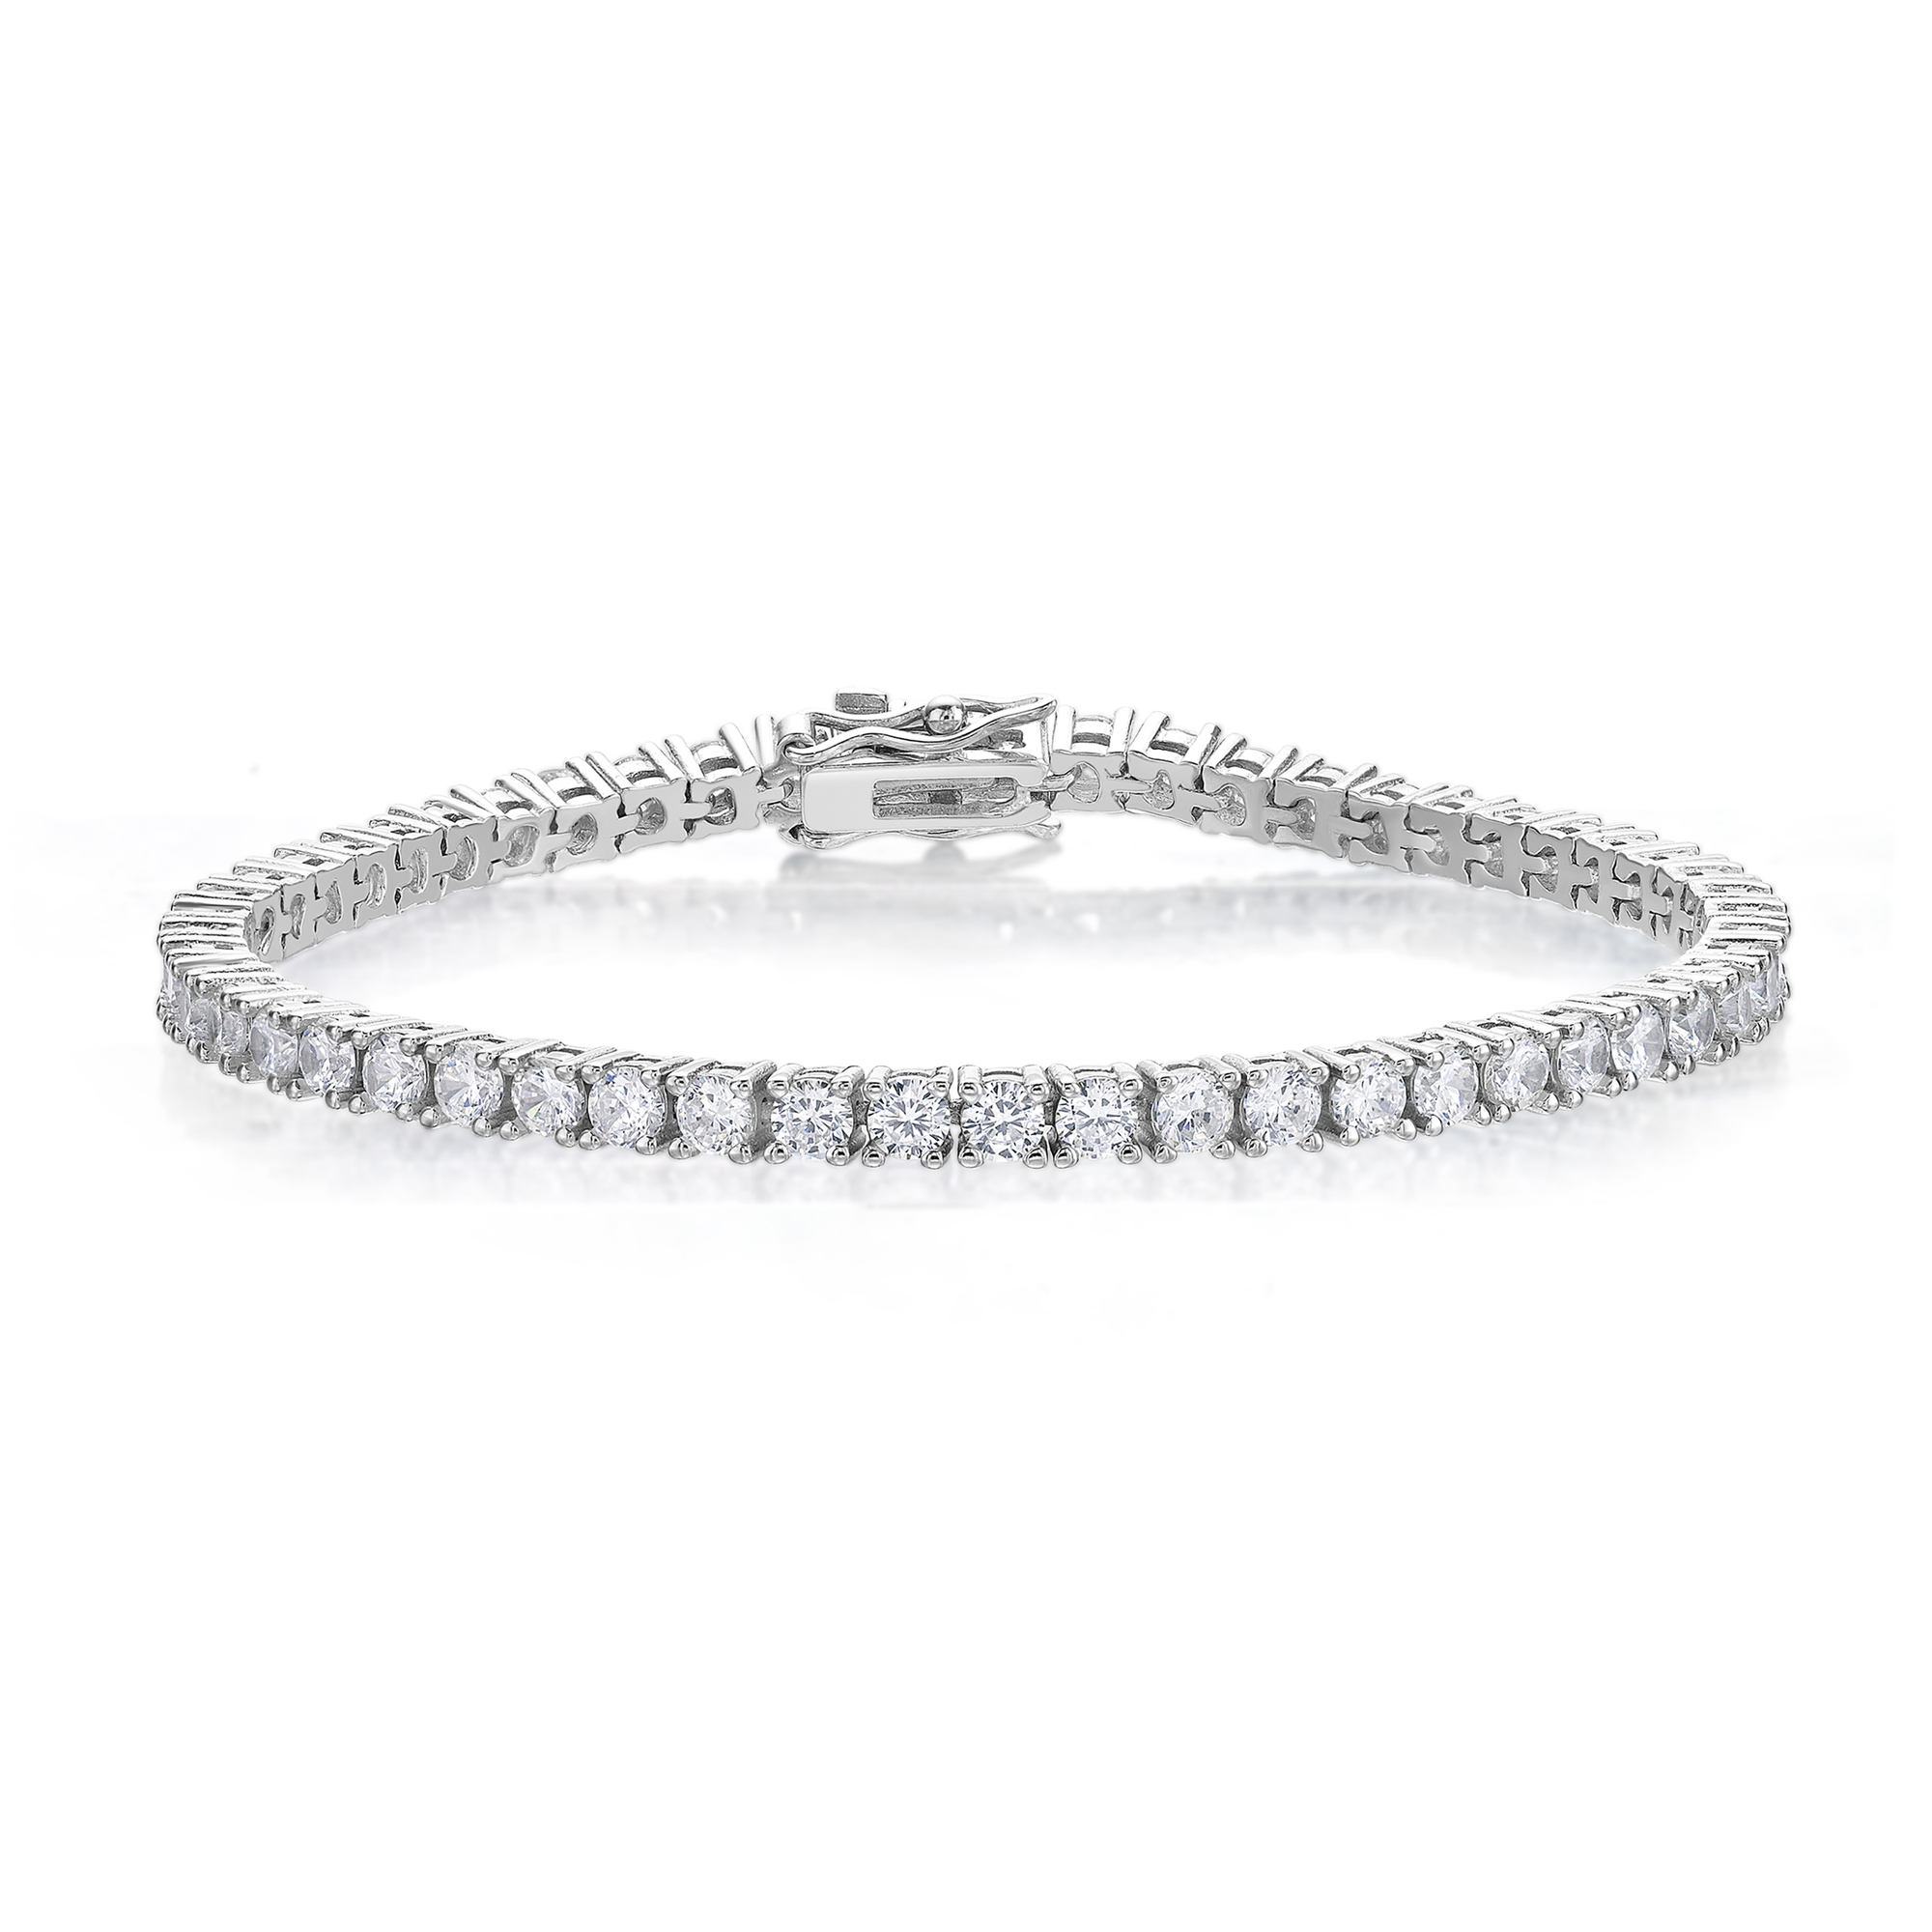 Lavari Jewelers Women's Tennis Bracelet, 925 Sterling Silver, Round Cubic Zirconia, 7 Inches